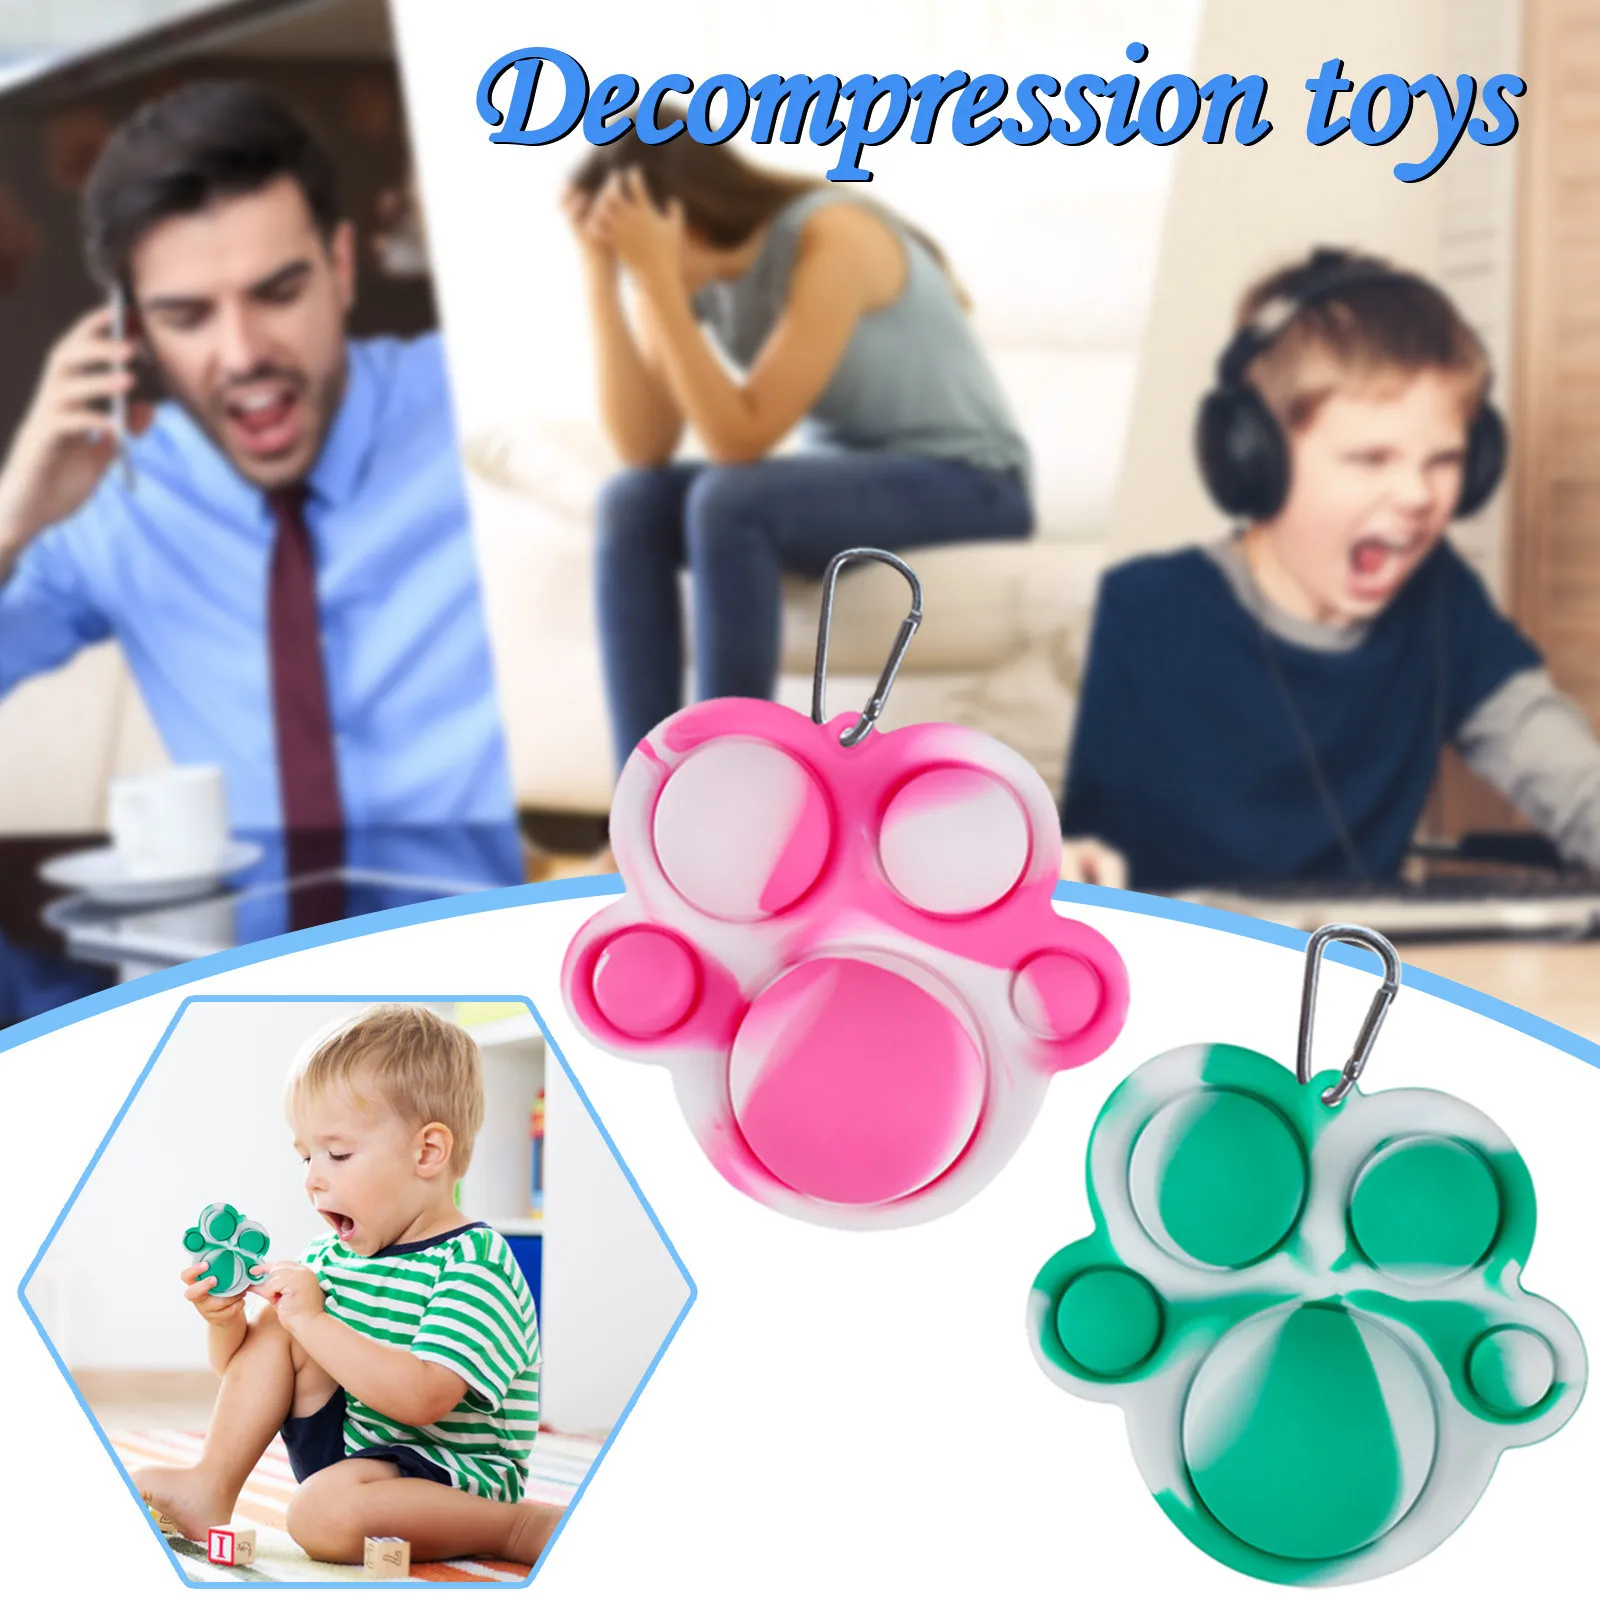 

2PC Educational Children's Toys Adult Relief Pressure Dimple Toys Pressure Board Controller Decompression Toys анисѬесс 40*